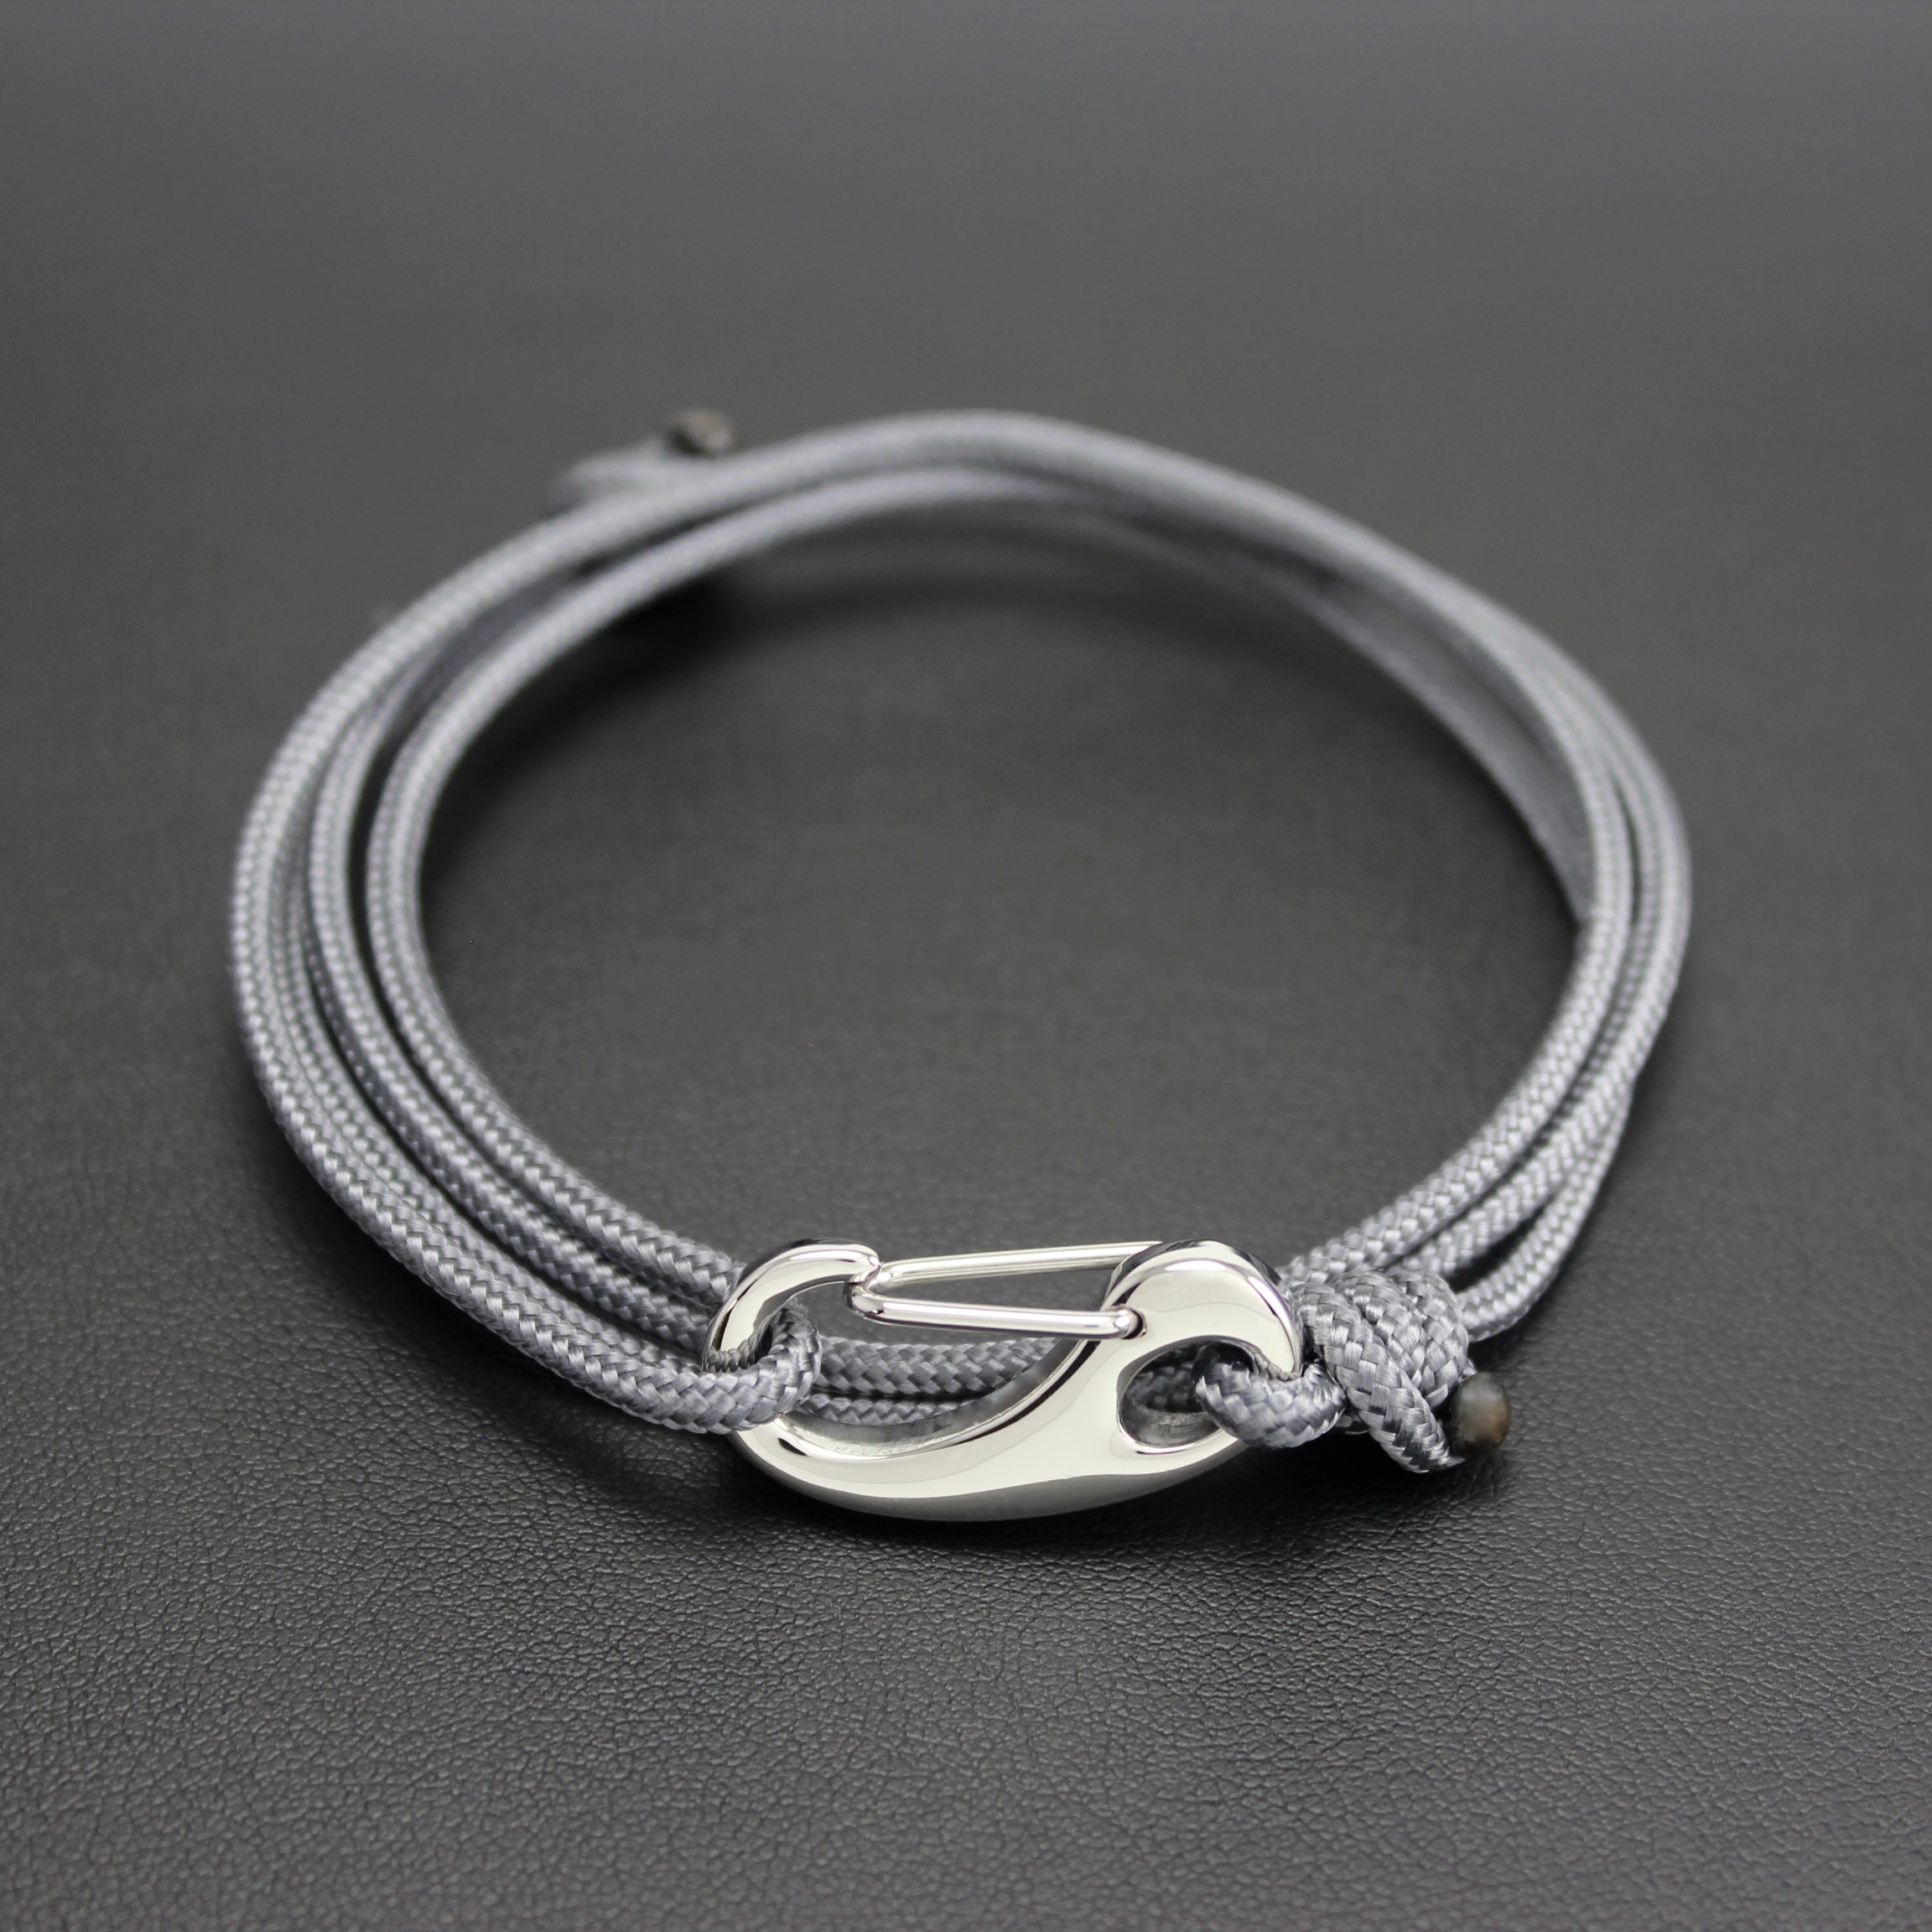 Mens | Tactical Cord + Stainless Steel Bracelet in Grey